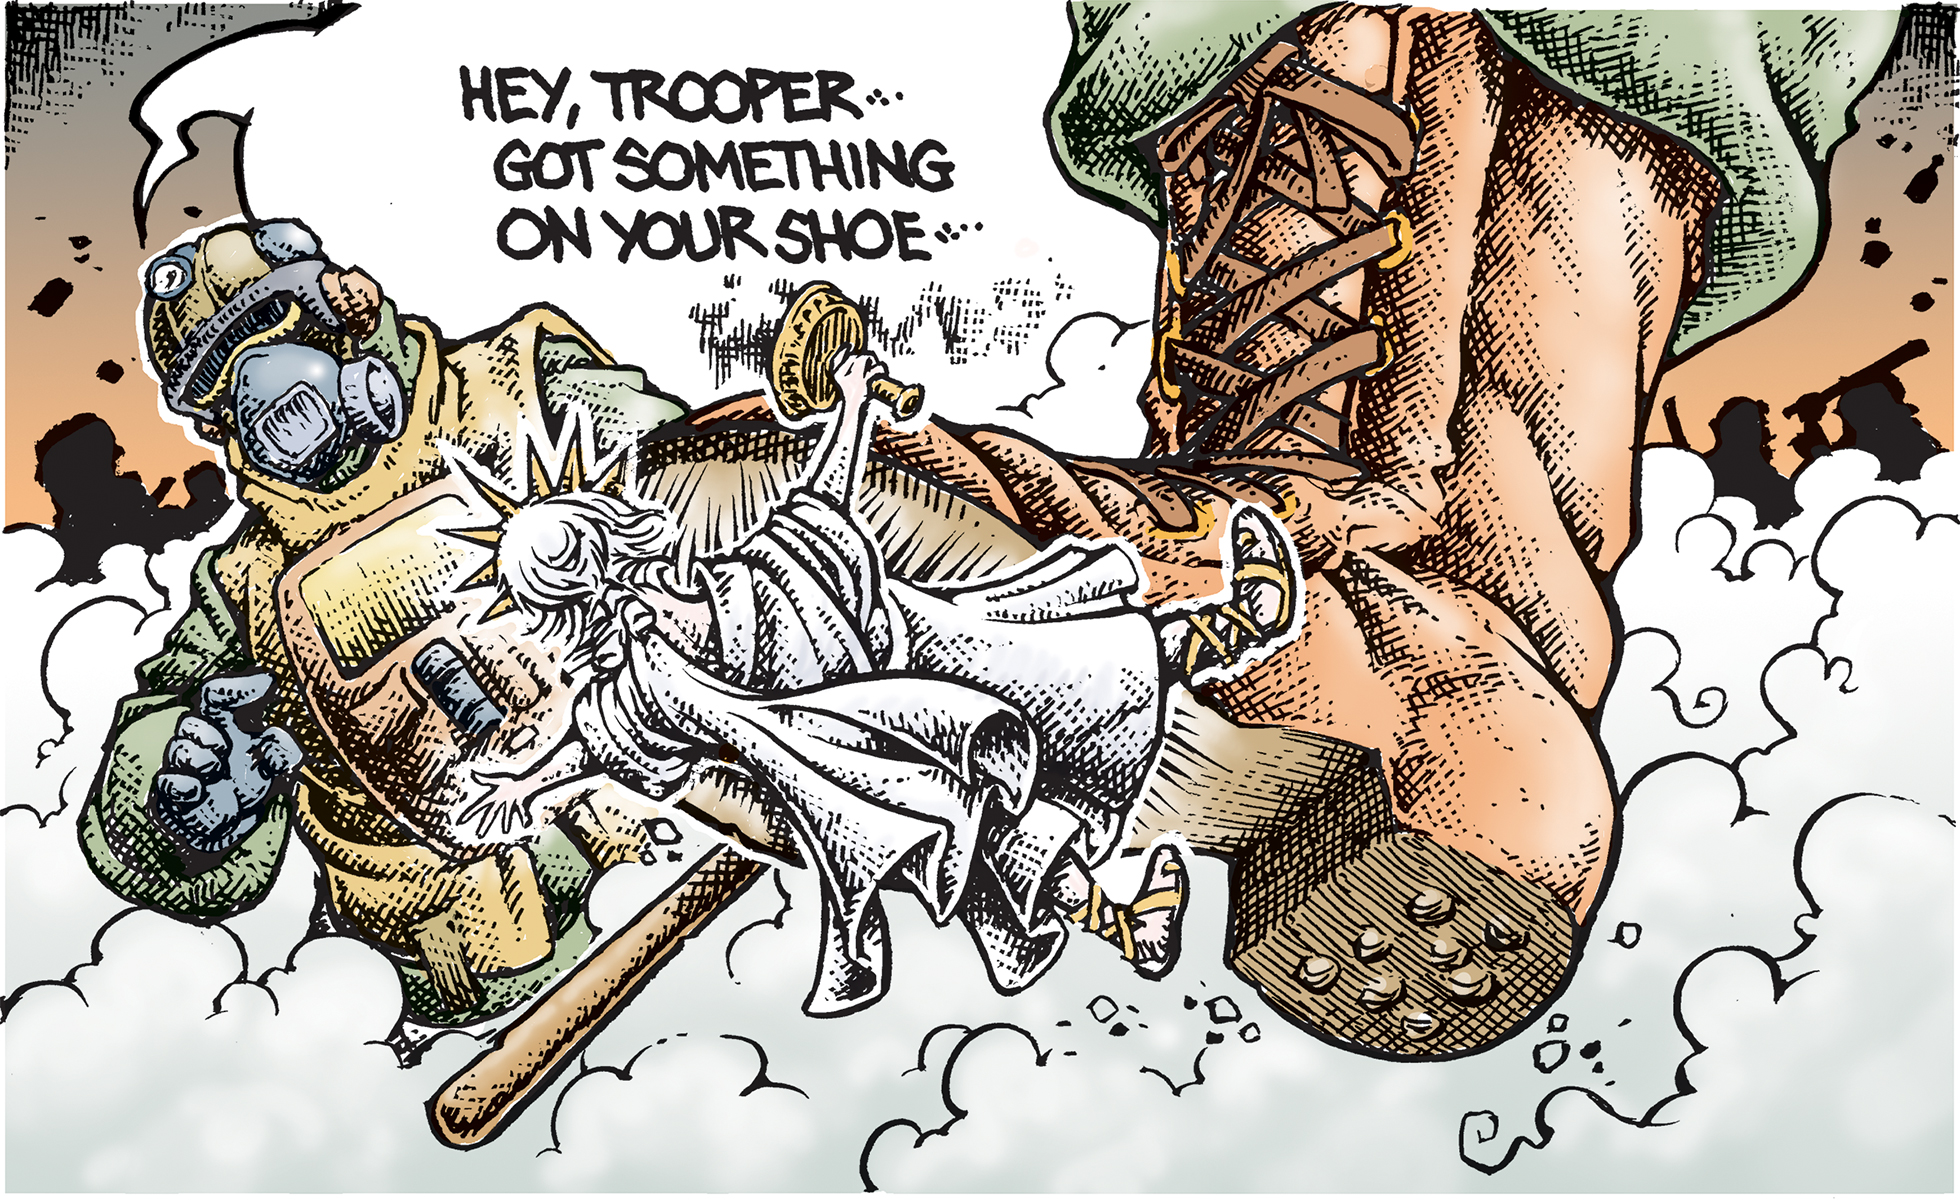 A large boot is crushing Lady Liberty while a trooper says to the boot, "Hey trooper—got something on your shoe."